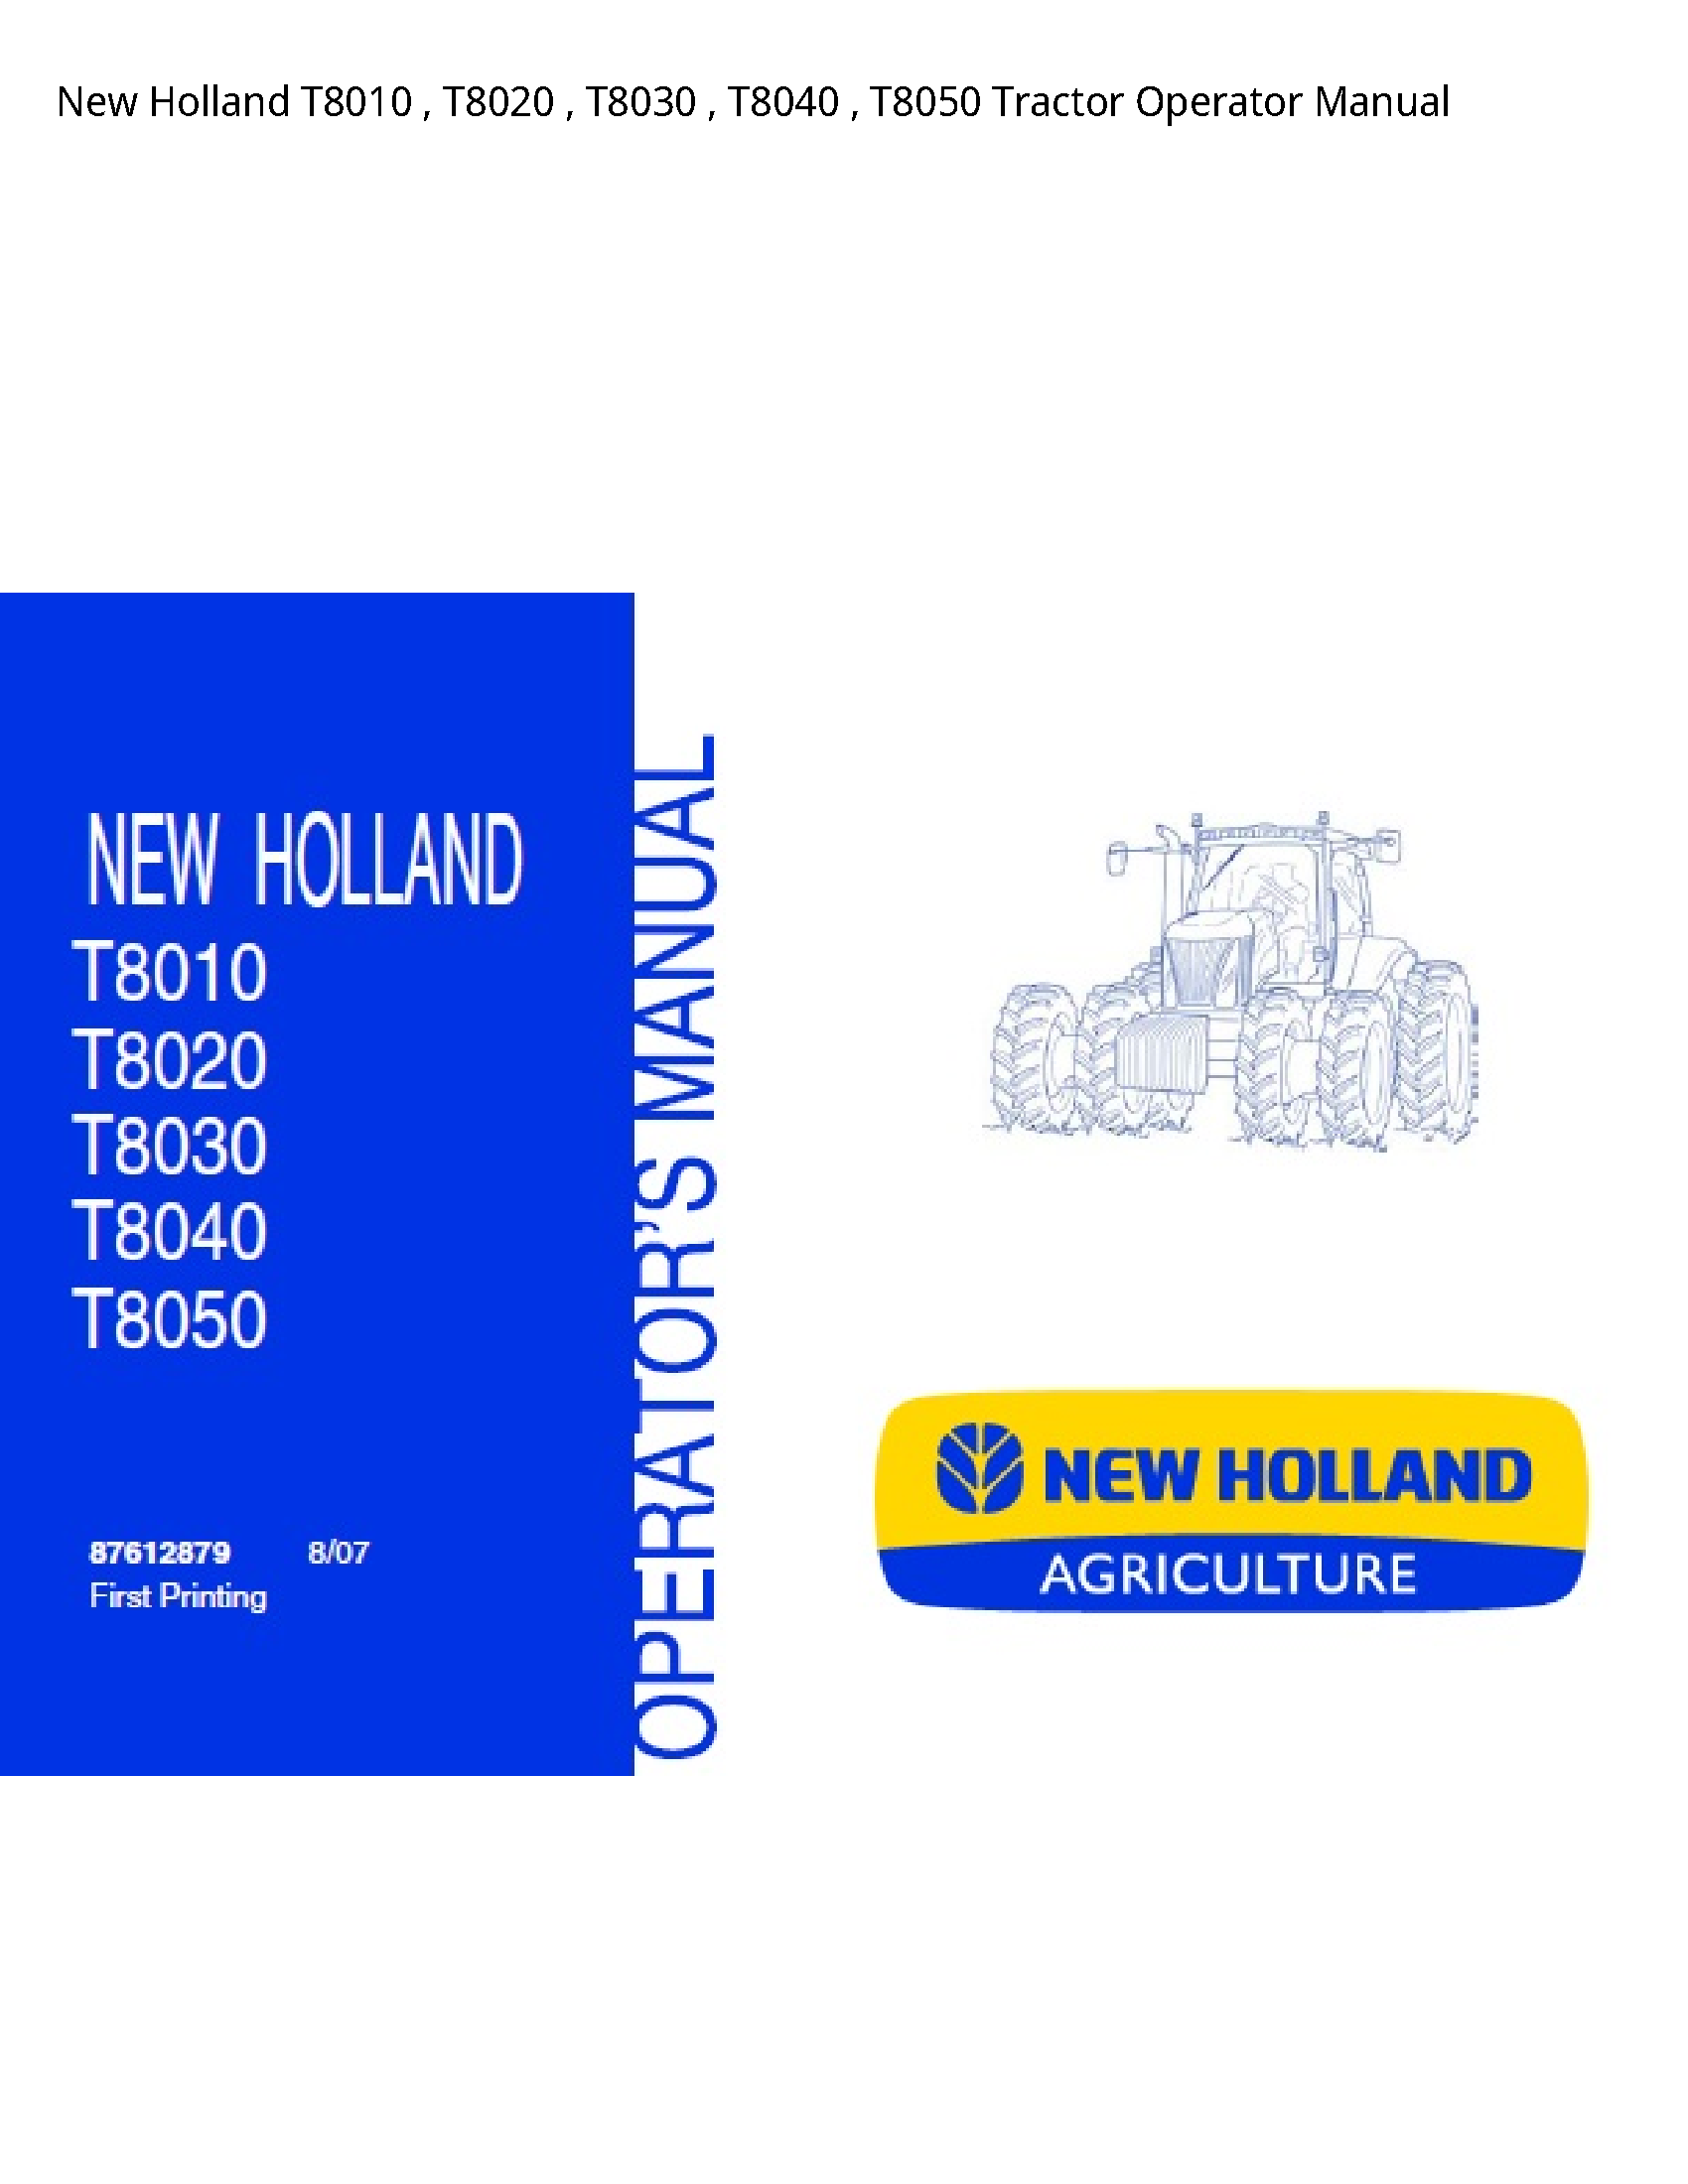 New Holland T8010 Tractor Operator manual